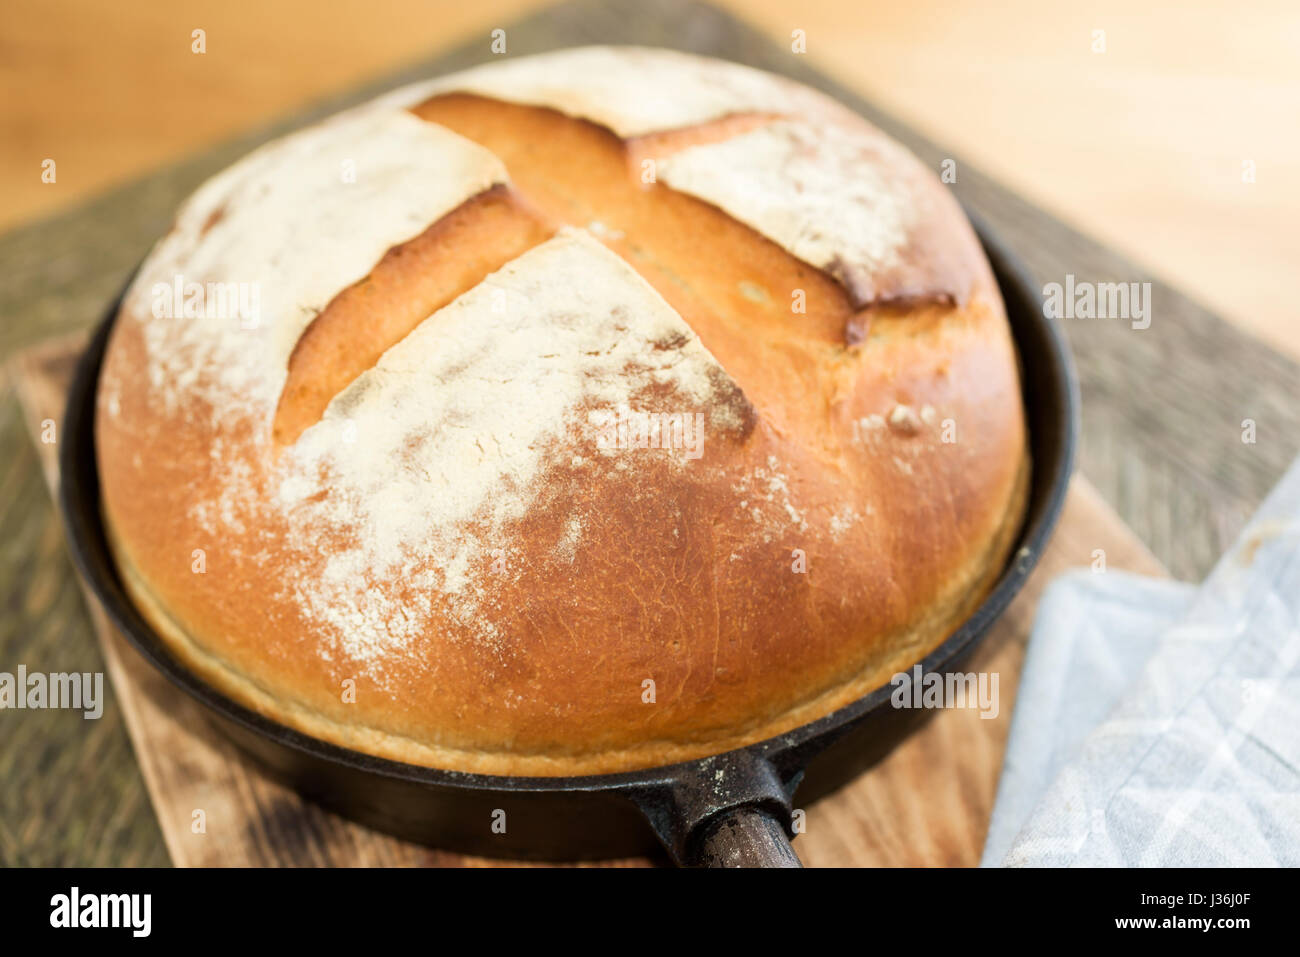 Newly baked artisan bread in cast iron skillet on wooden cutting board. Gray potholder at side. Stock Photo